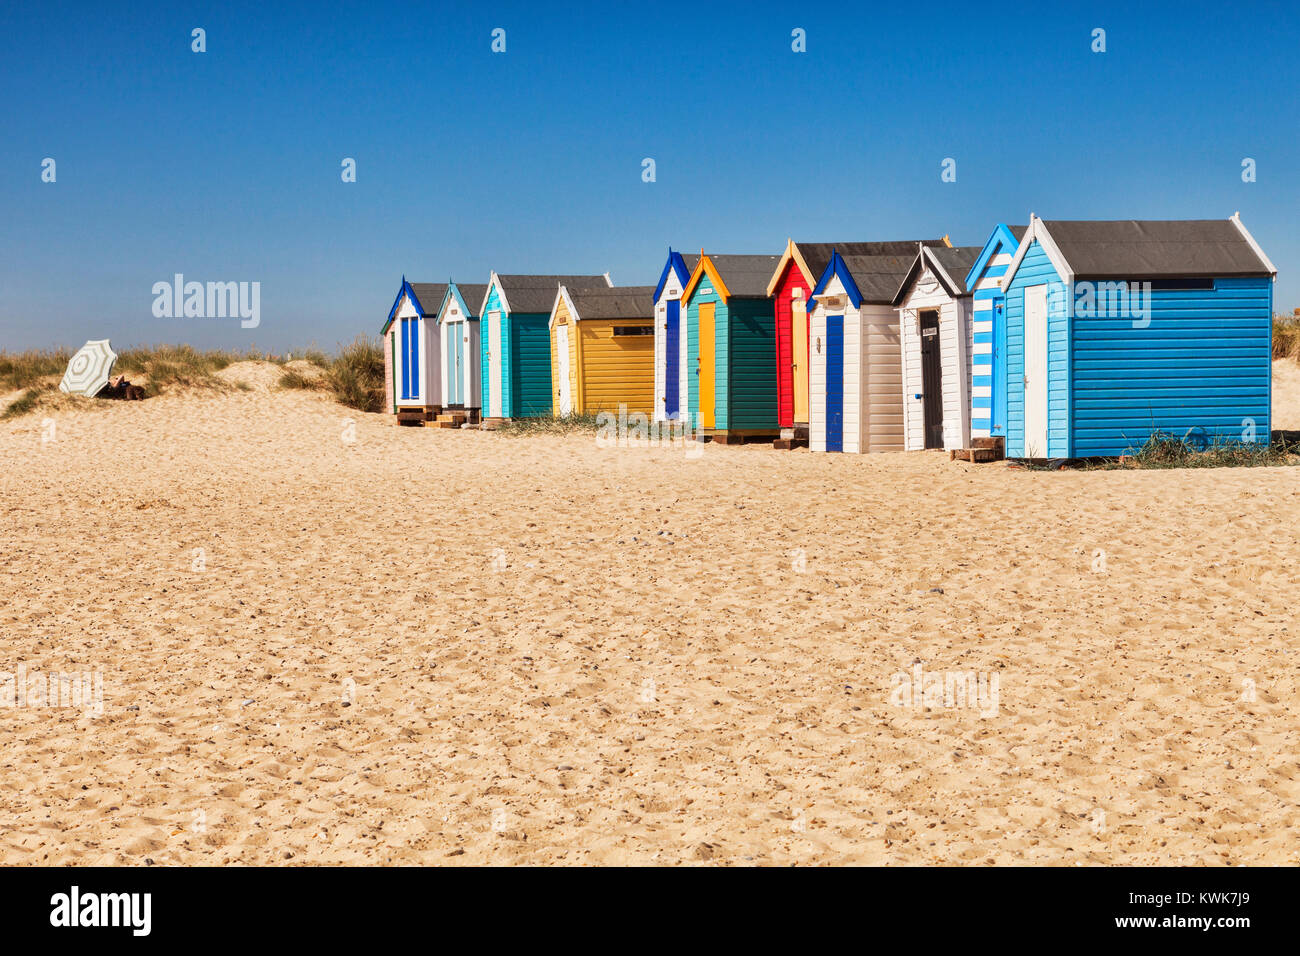 Beach huts on the beach at Southwold, Suffolk, England. Stock Photo